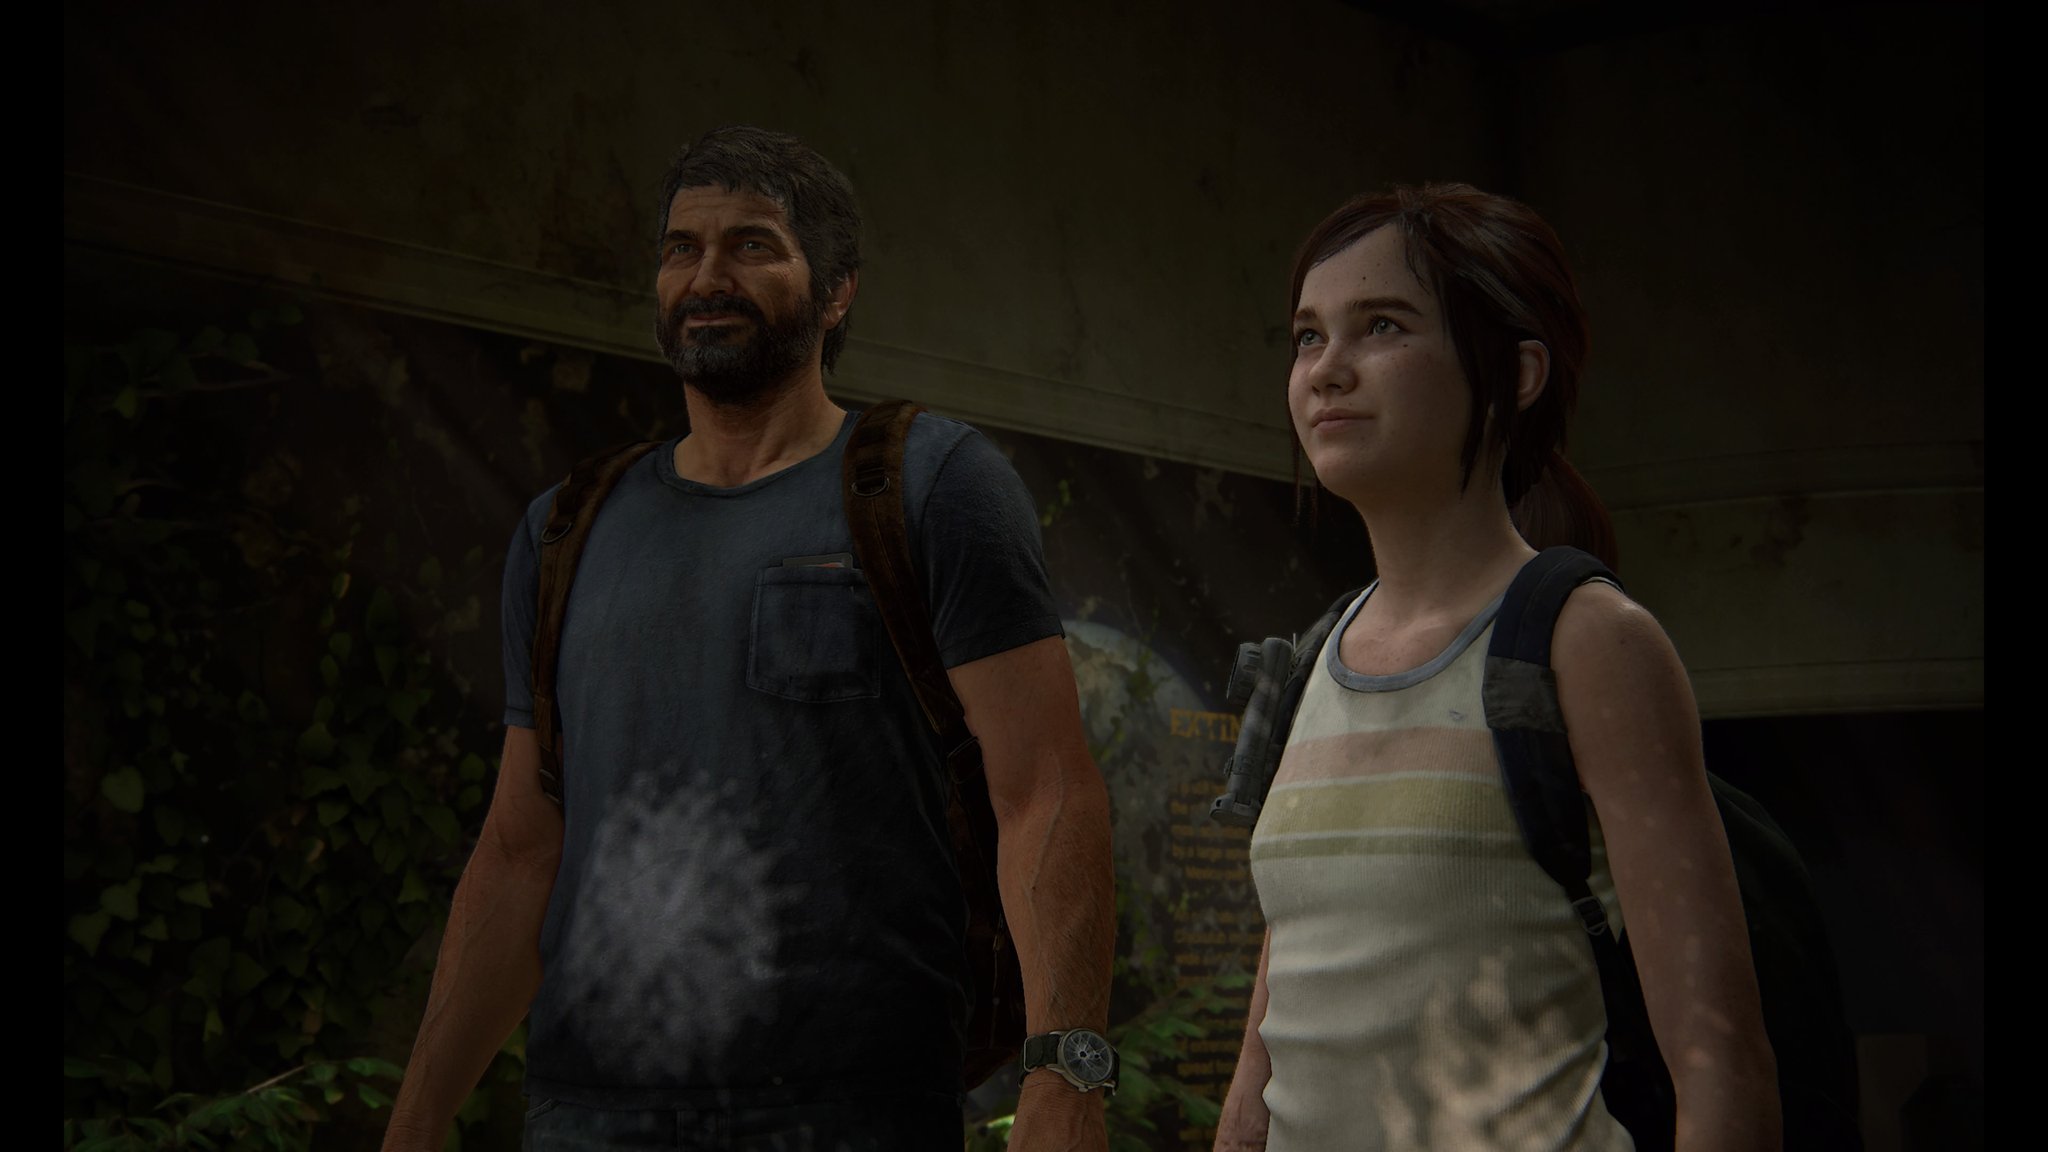 The Last of Us Part III Story Outline Has Been Written but Game Isn't  Currently in Production